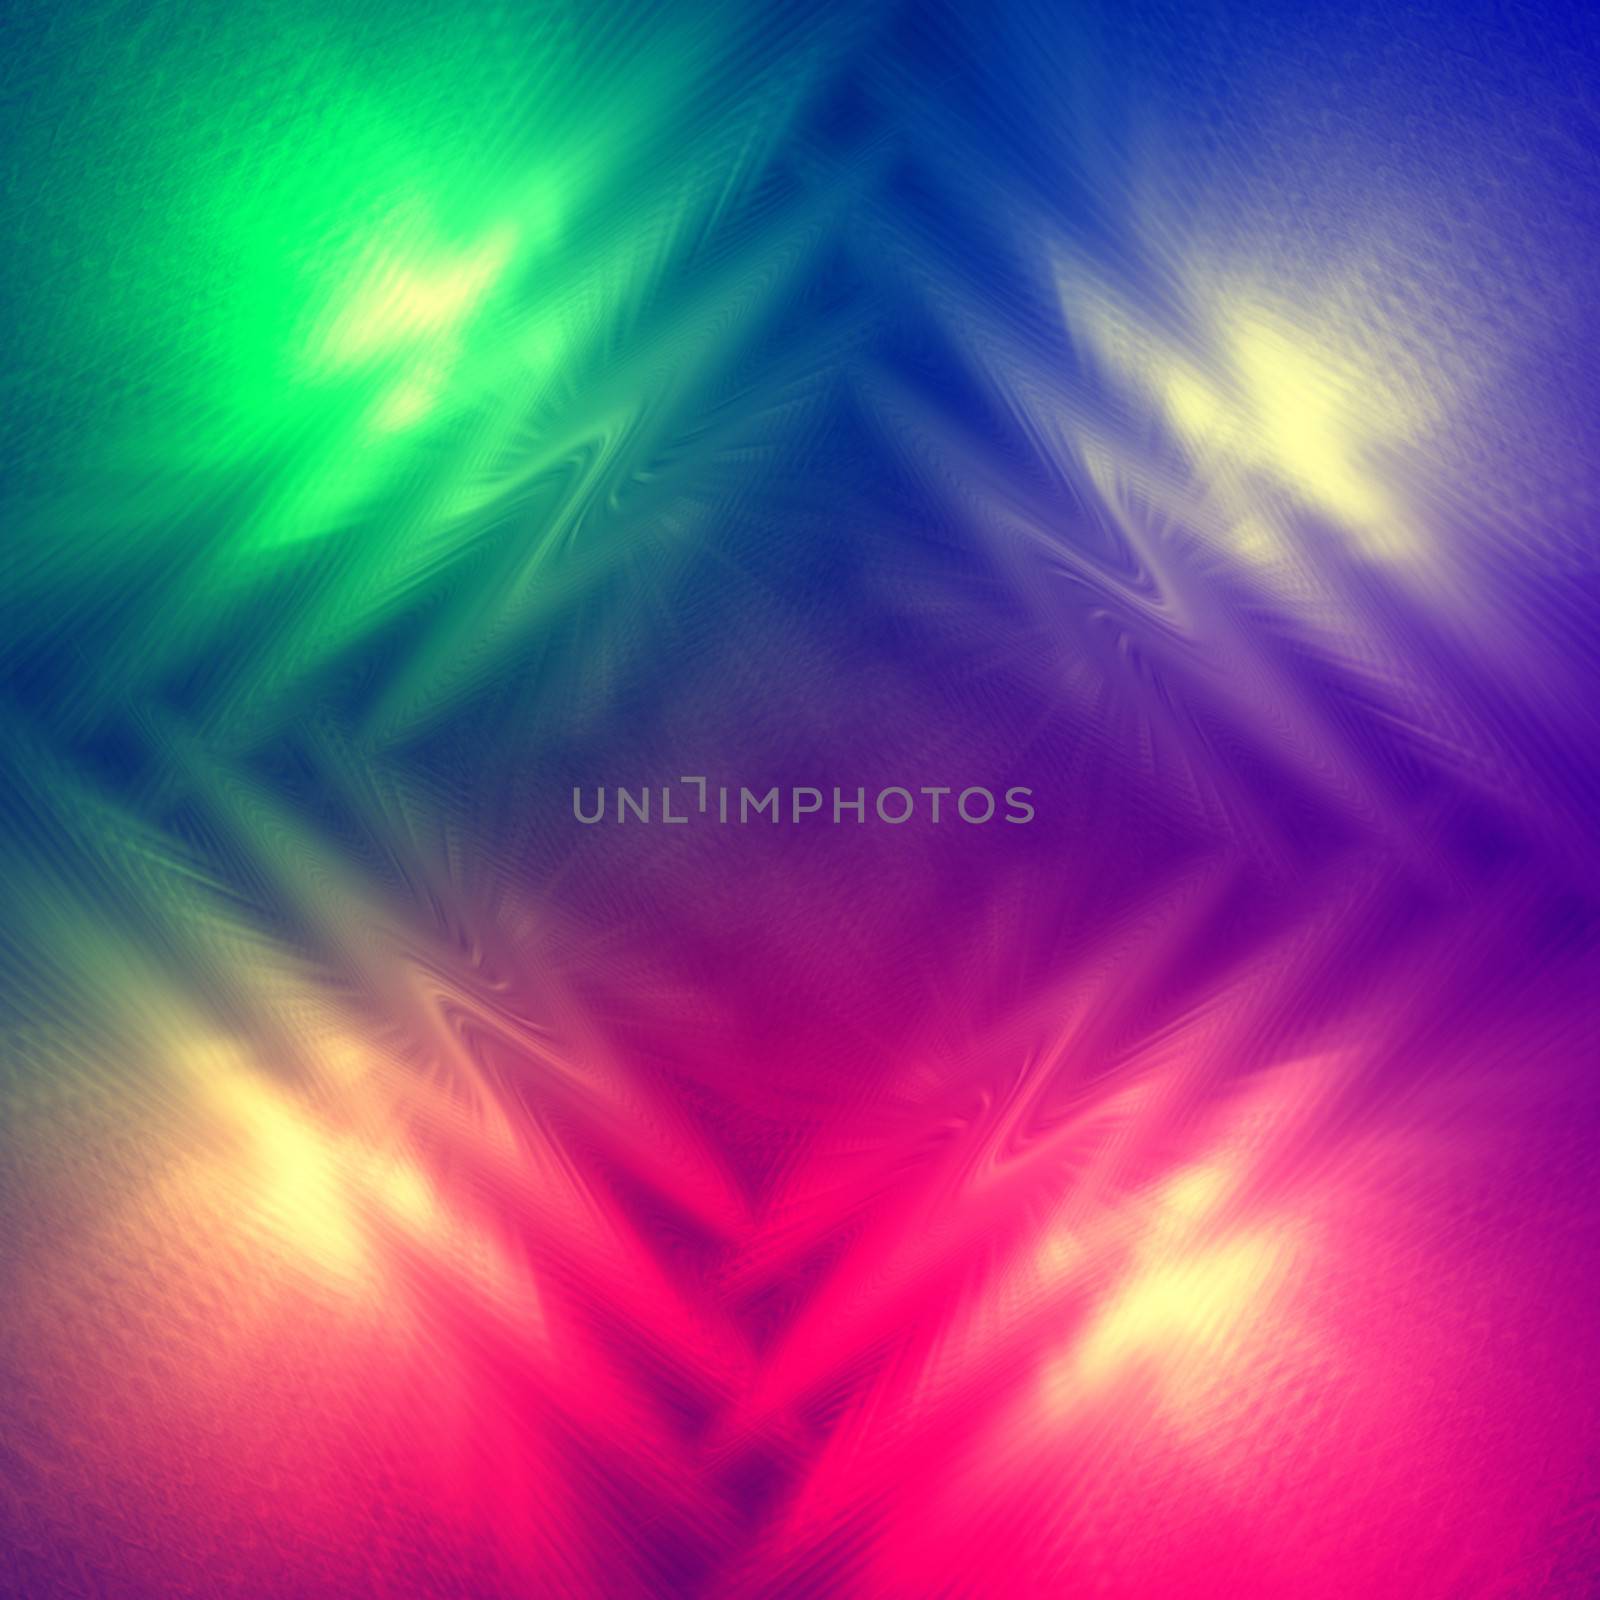 gradient abstract background with wave and lights